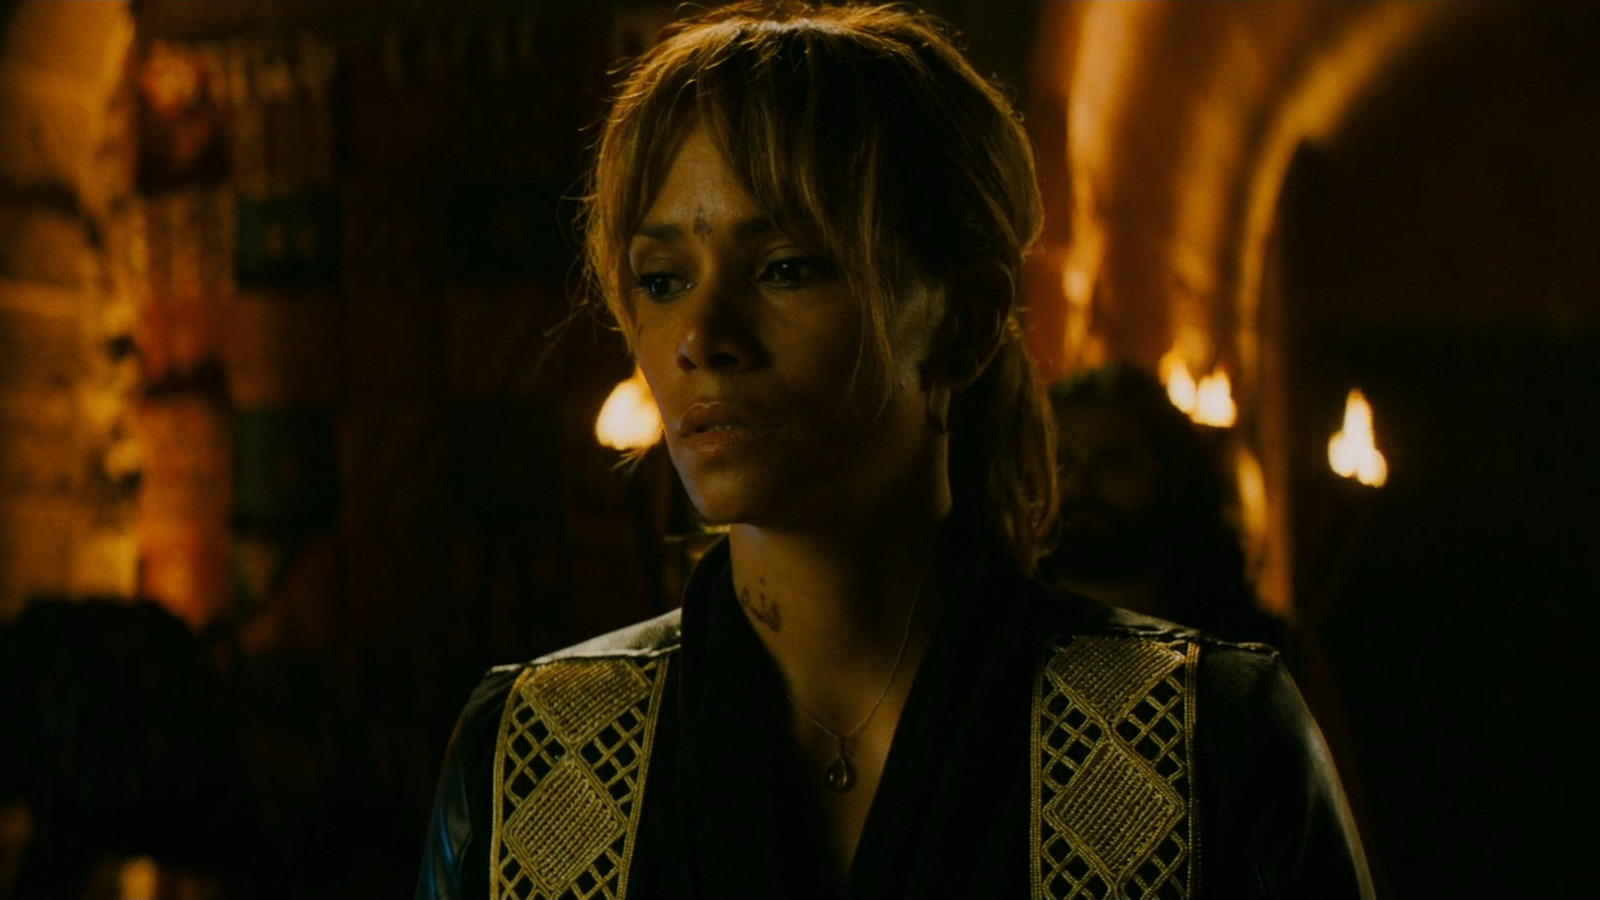 Halle Berry suffered serious injuries while training for John Wick 3